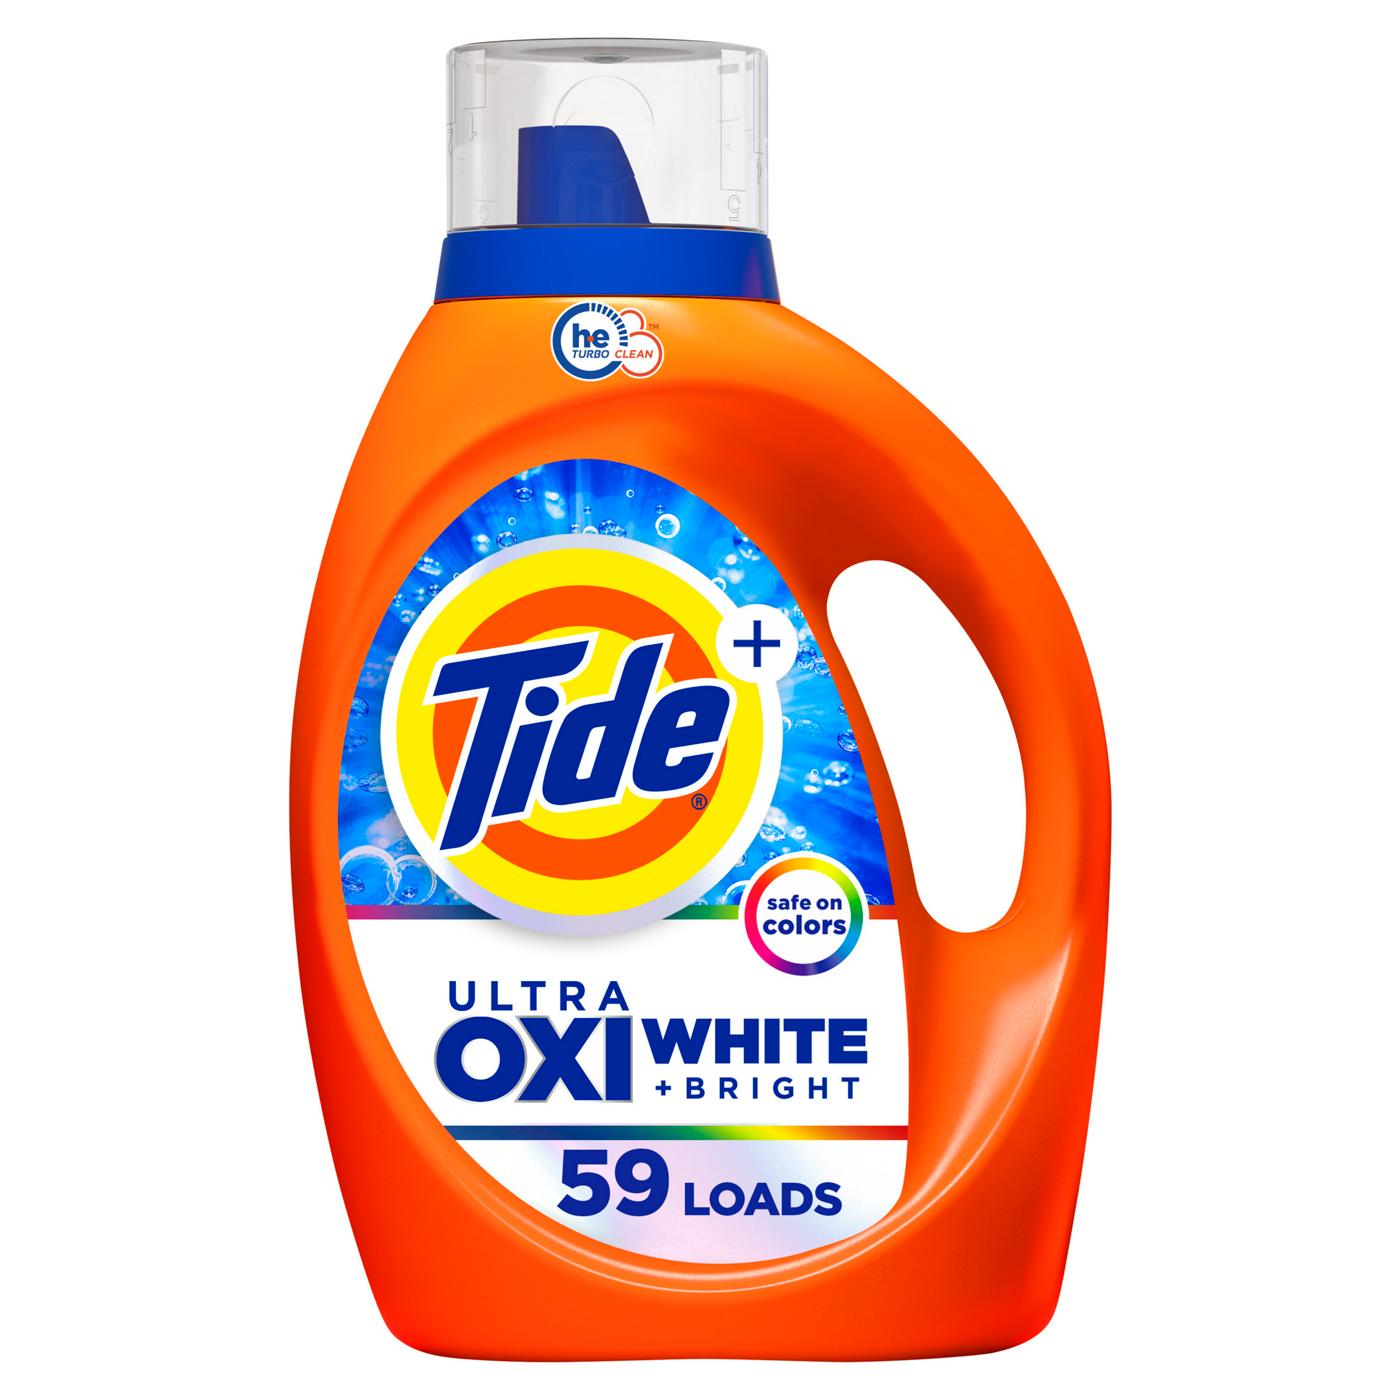 Tide + Ultra Oxi White & Bright HE Turbo Clean Liquid Laundry Detergent, 59 Loads; image 1 of 8